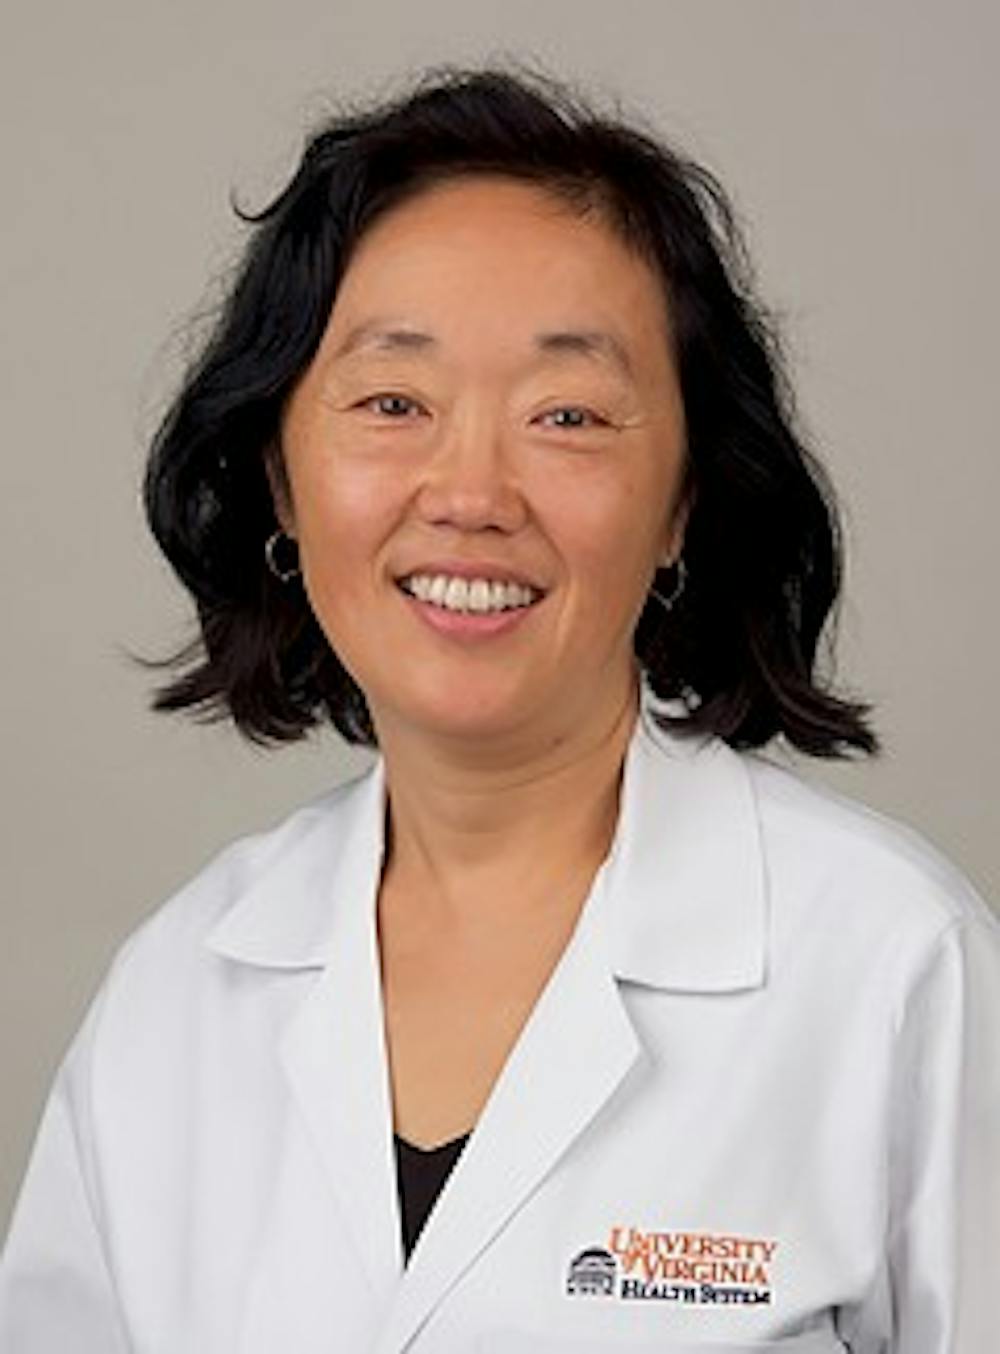 Rachel Moon, division head of General Pediatrics and co-author of the study, published the research in the Journal of Pediatrics in March.